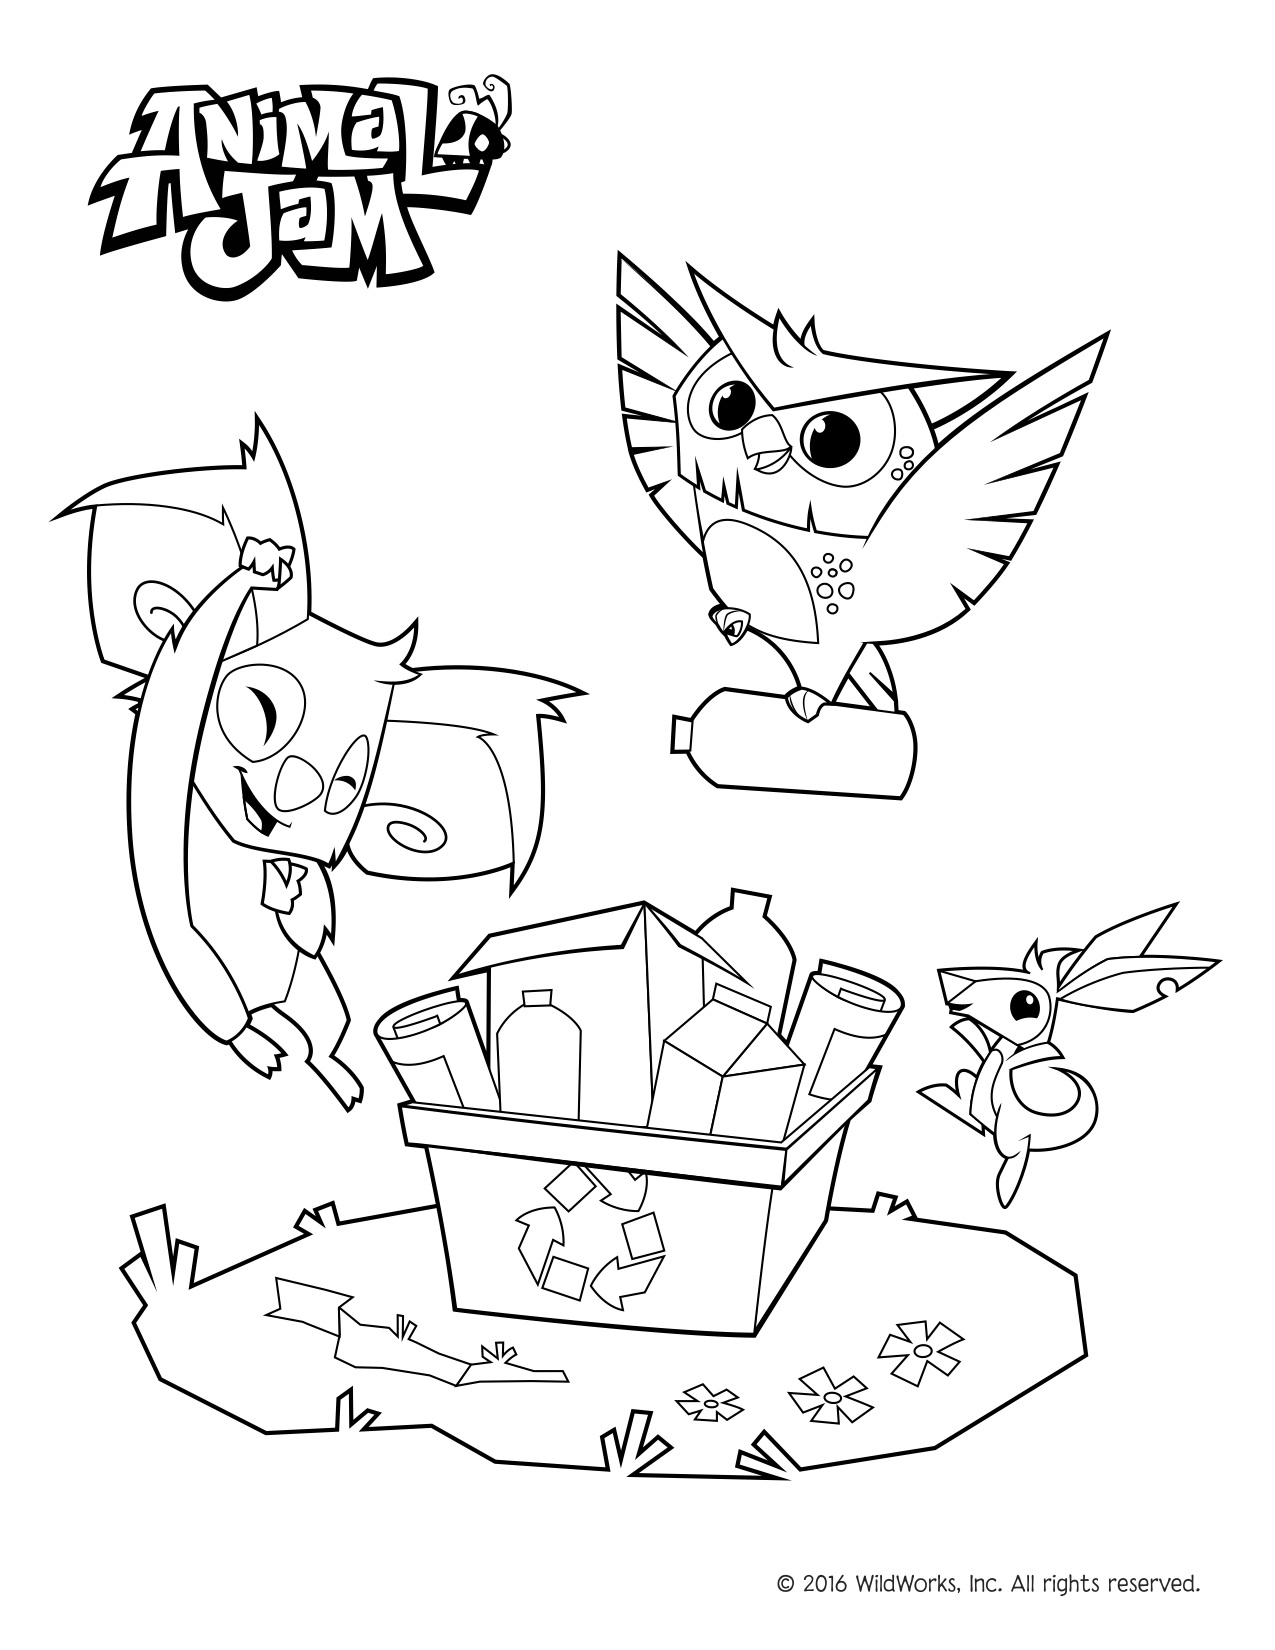 Animal Jam Coloring Pages Printable Pdf - coloring pages of animal jam